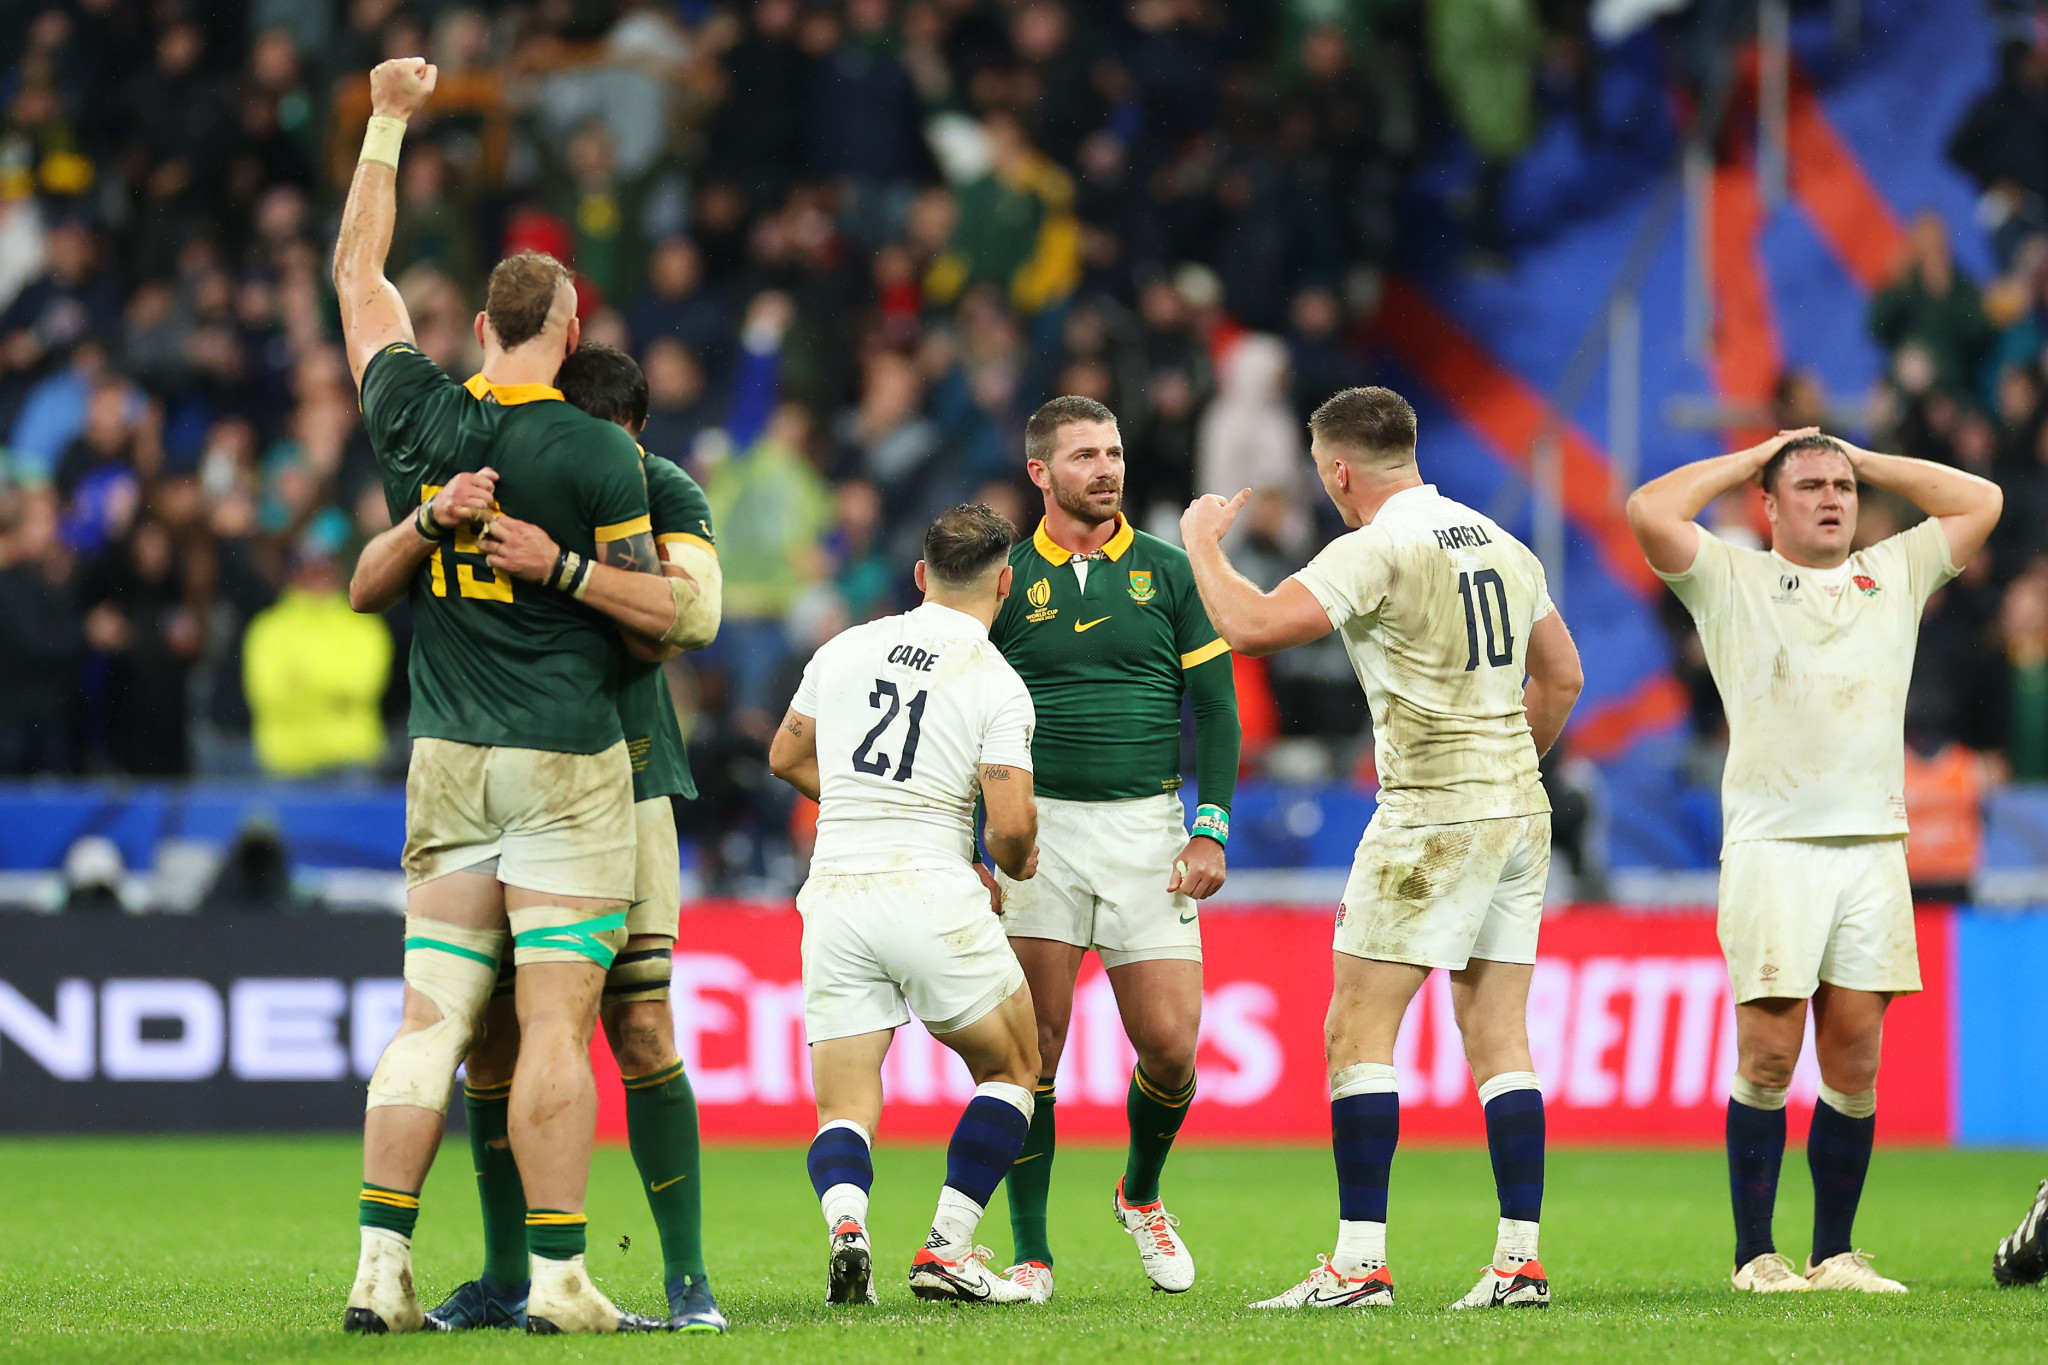 Springboks inflict crushing late defeat on England in Rugby World Cup semi-final